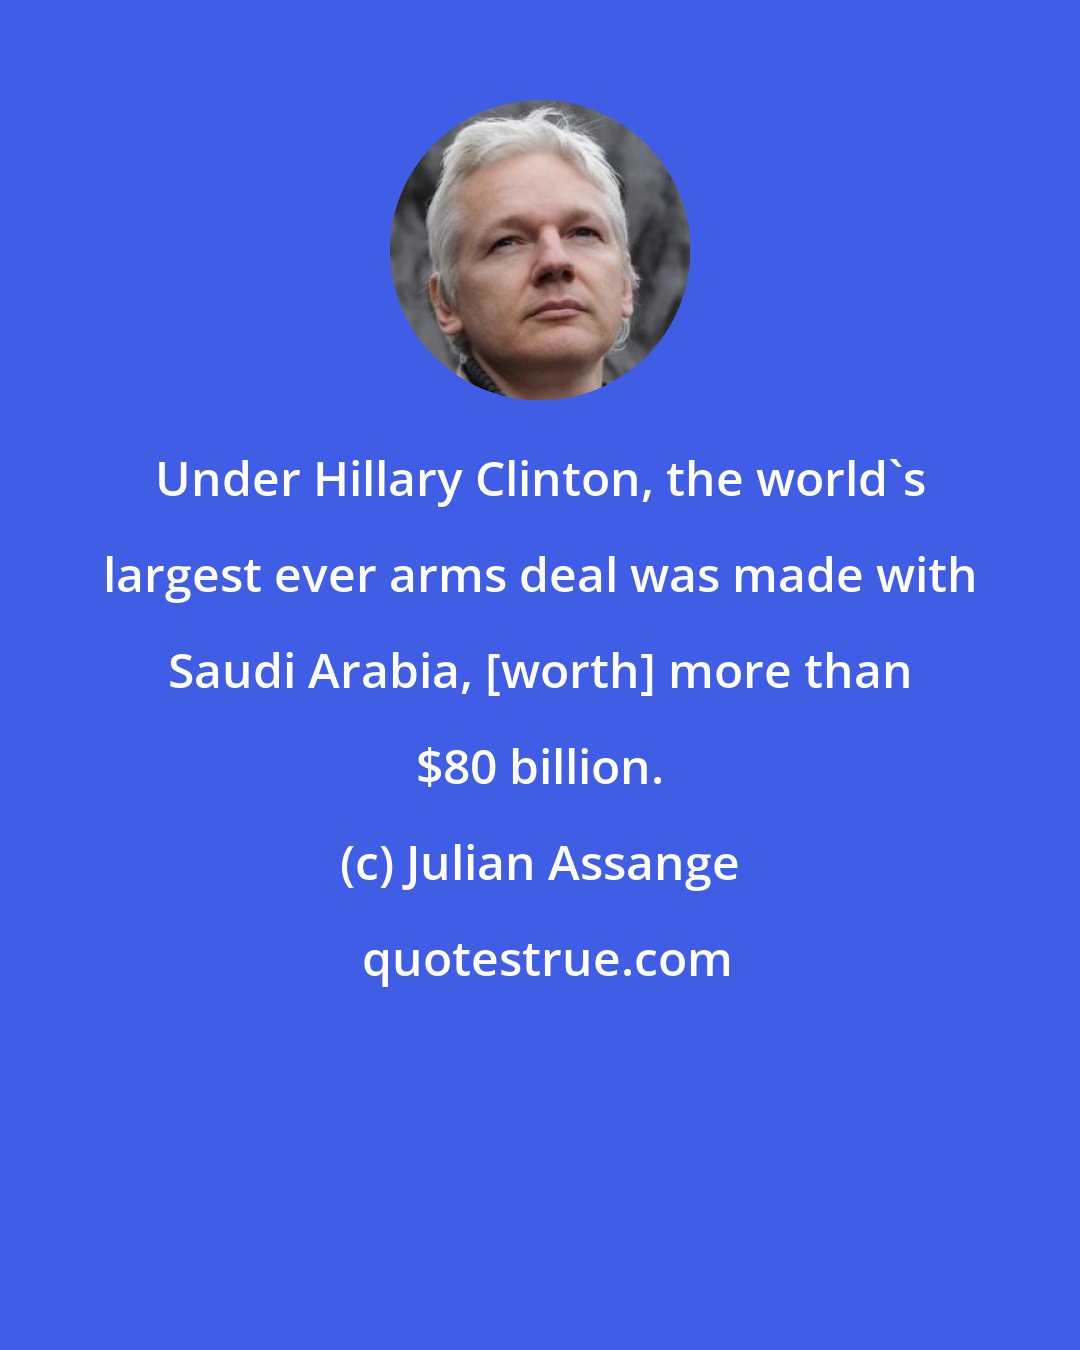 Julian Assange: Under Hillary Clinton, the world's largest ever arms deal was made with Saudi Arabia, [worth] more than $80 billion.